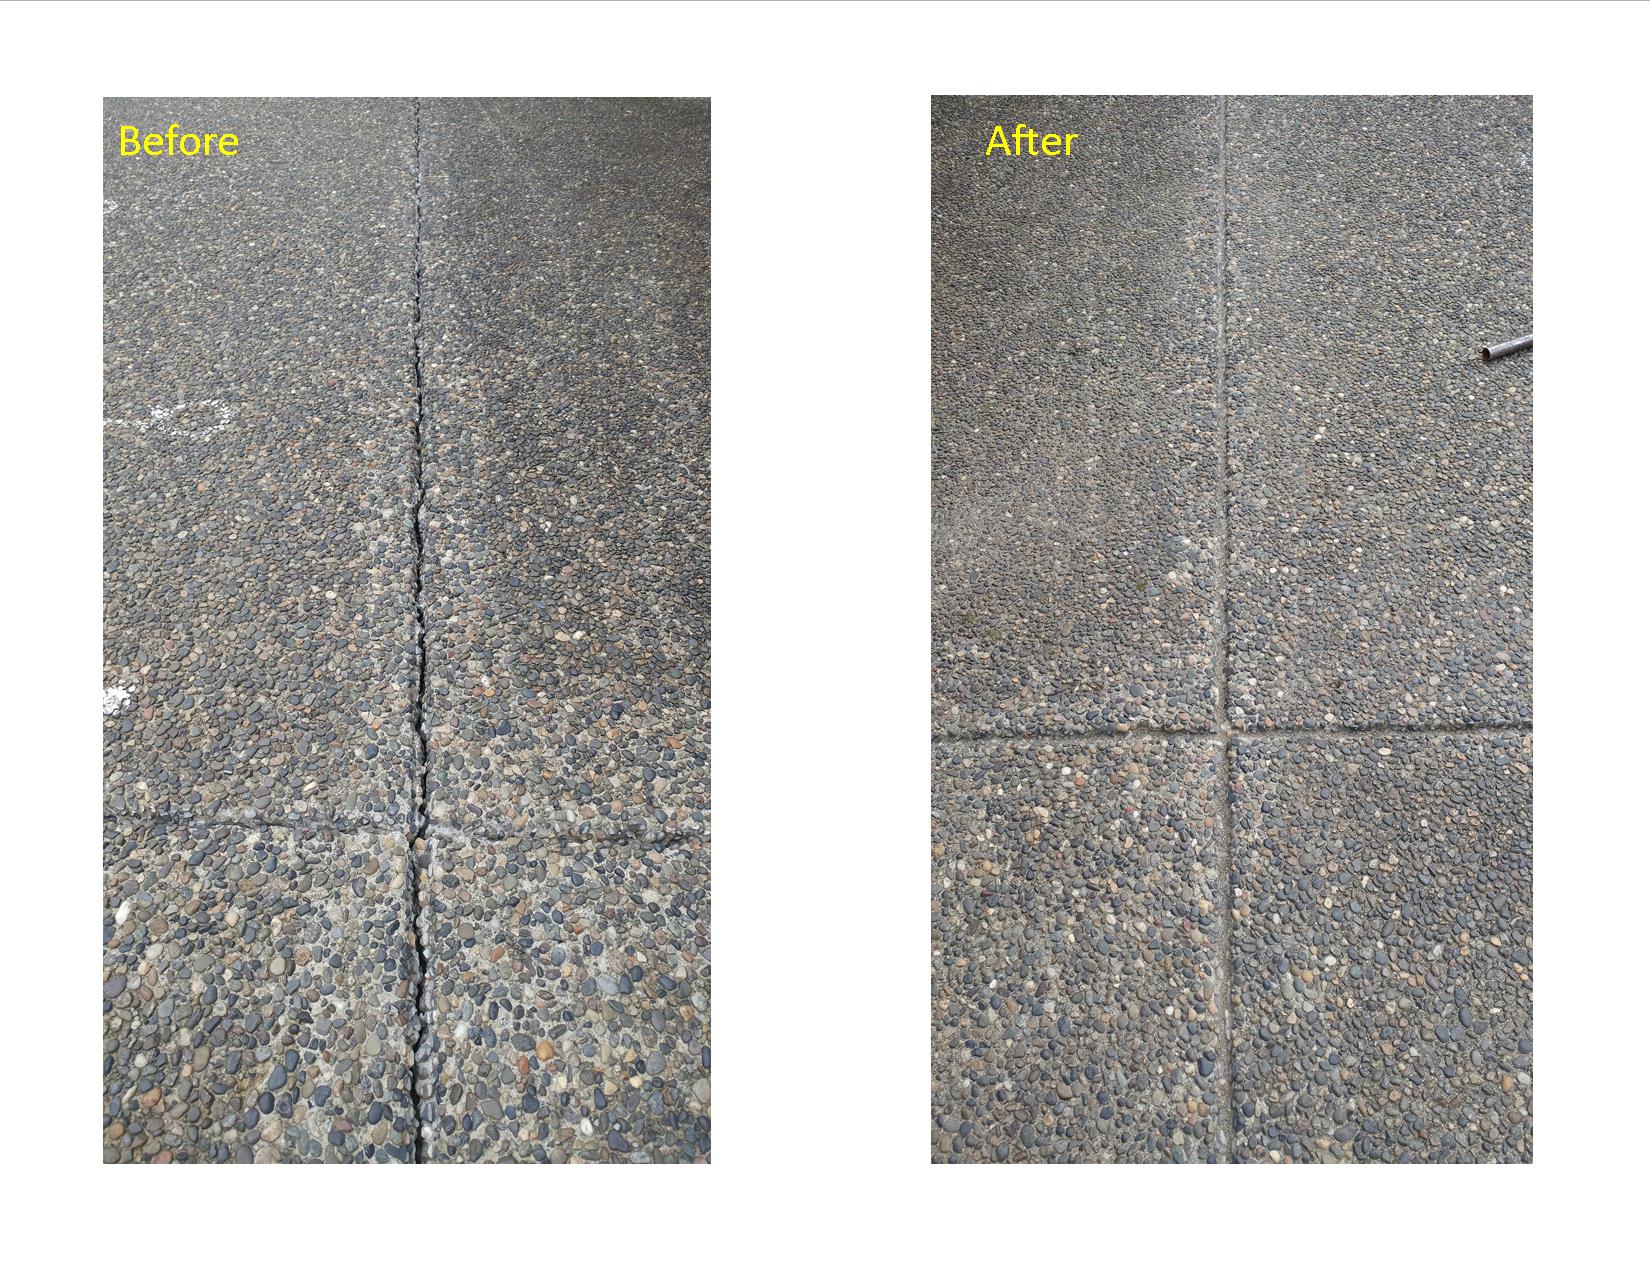 Concrete crack repair before and after